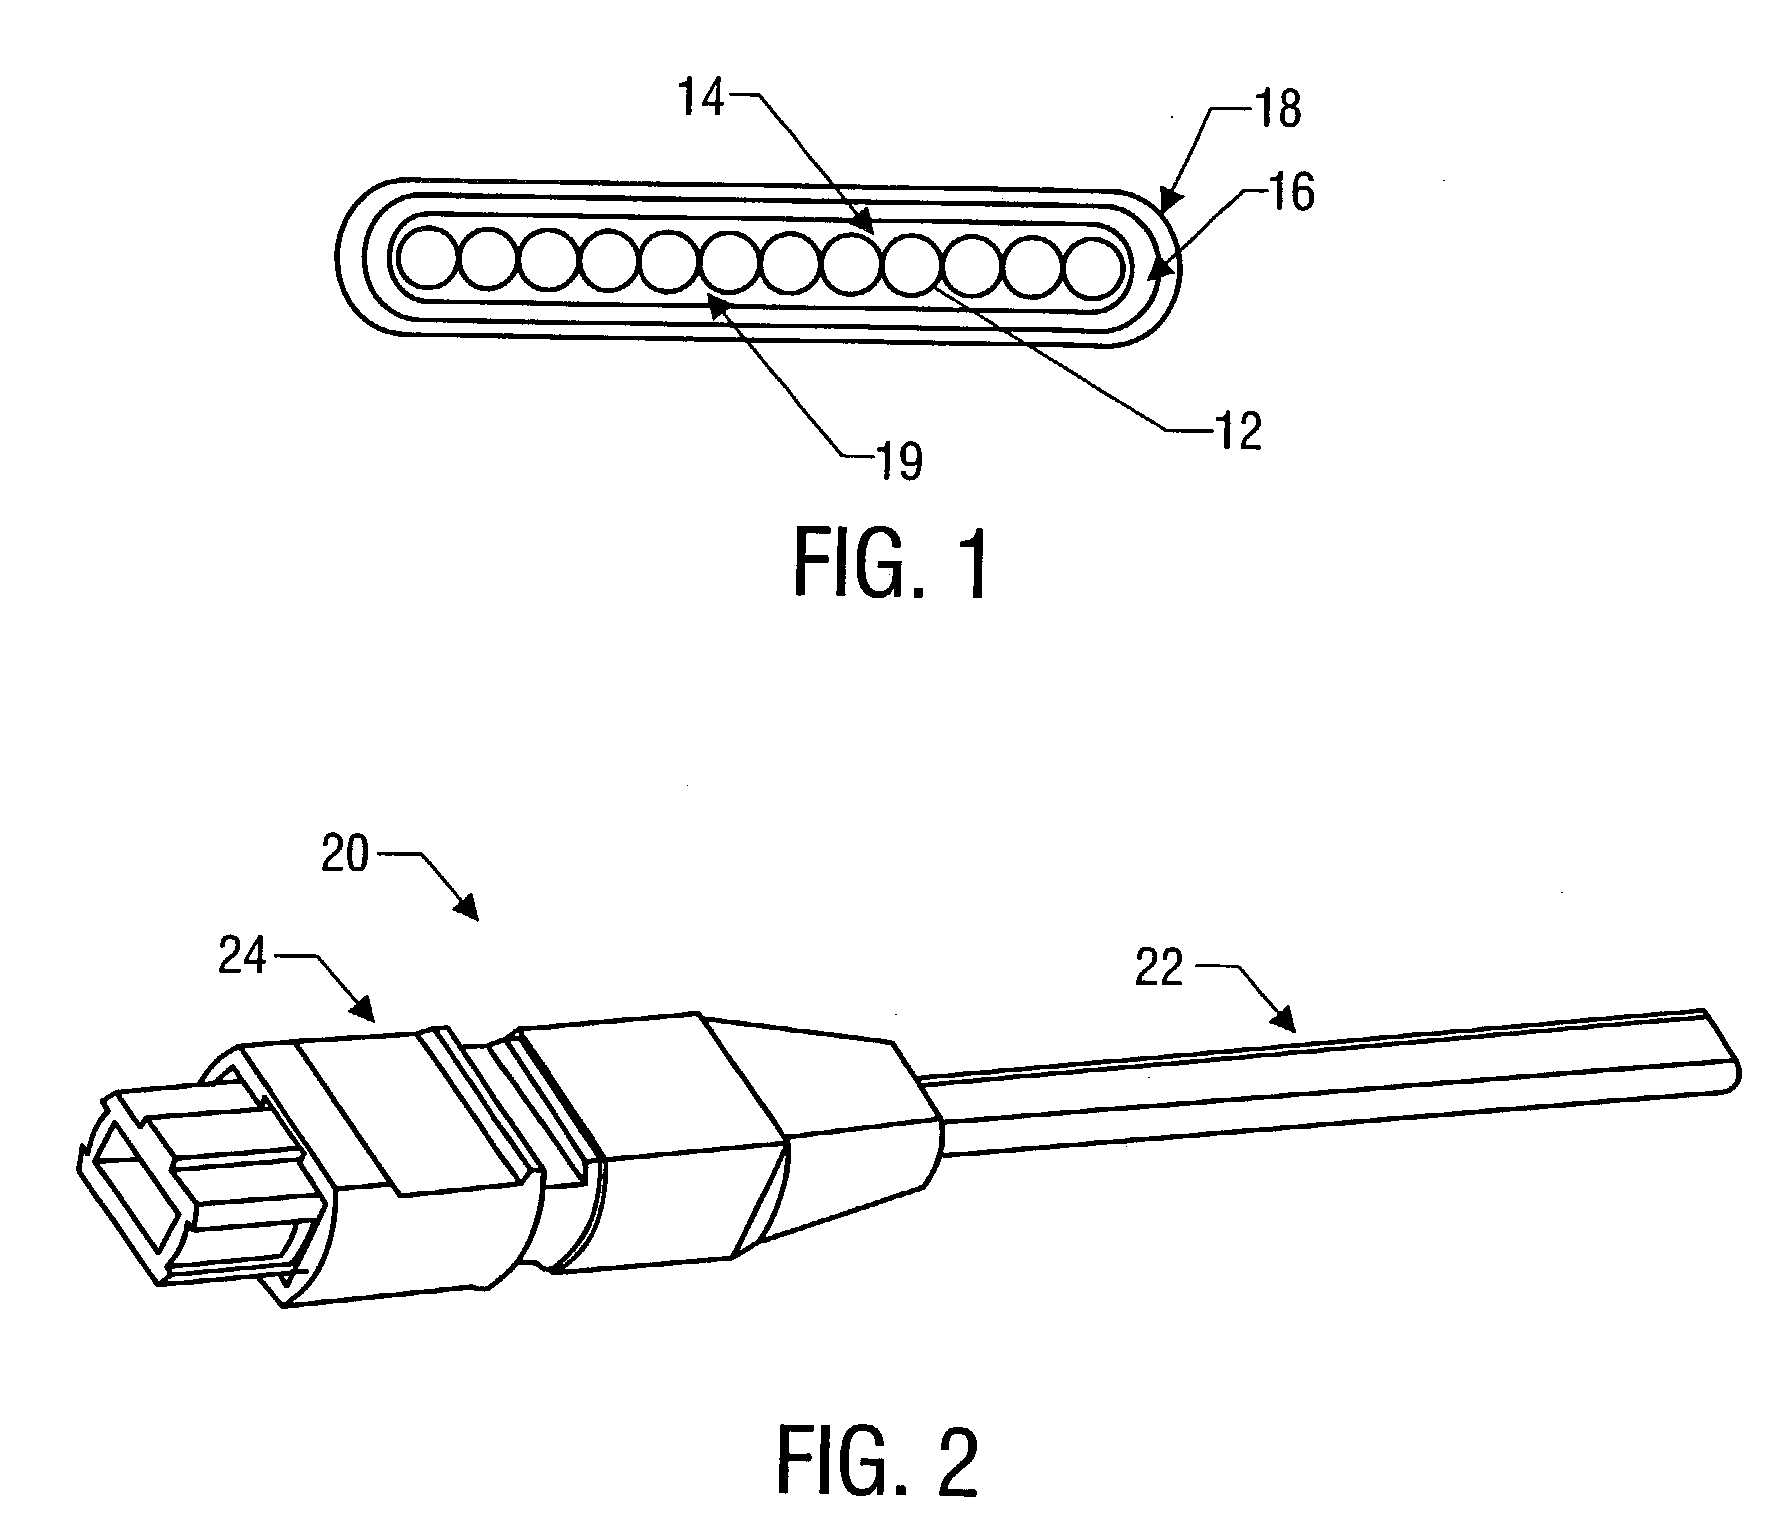 Modified, field installable, field adjustable flexible angled boot for multi-conductor cables and process for installing the same